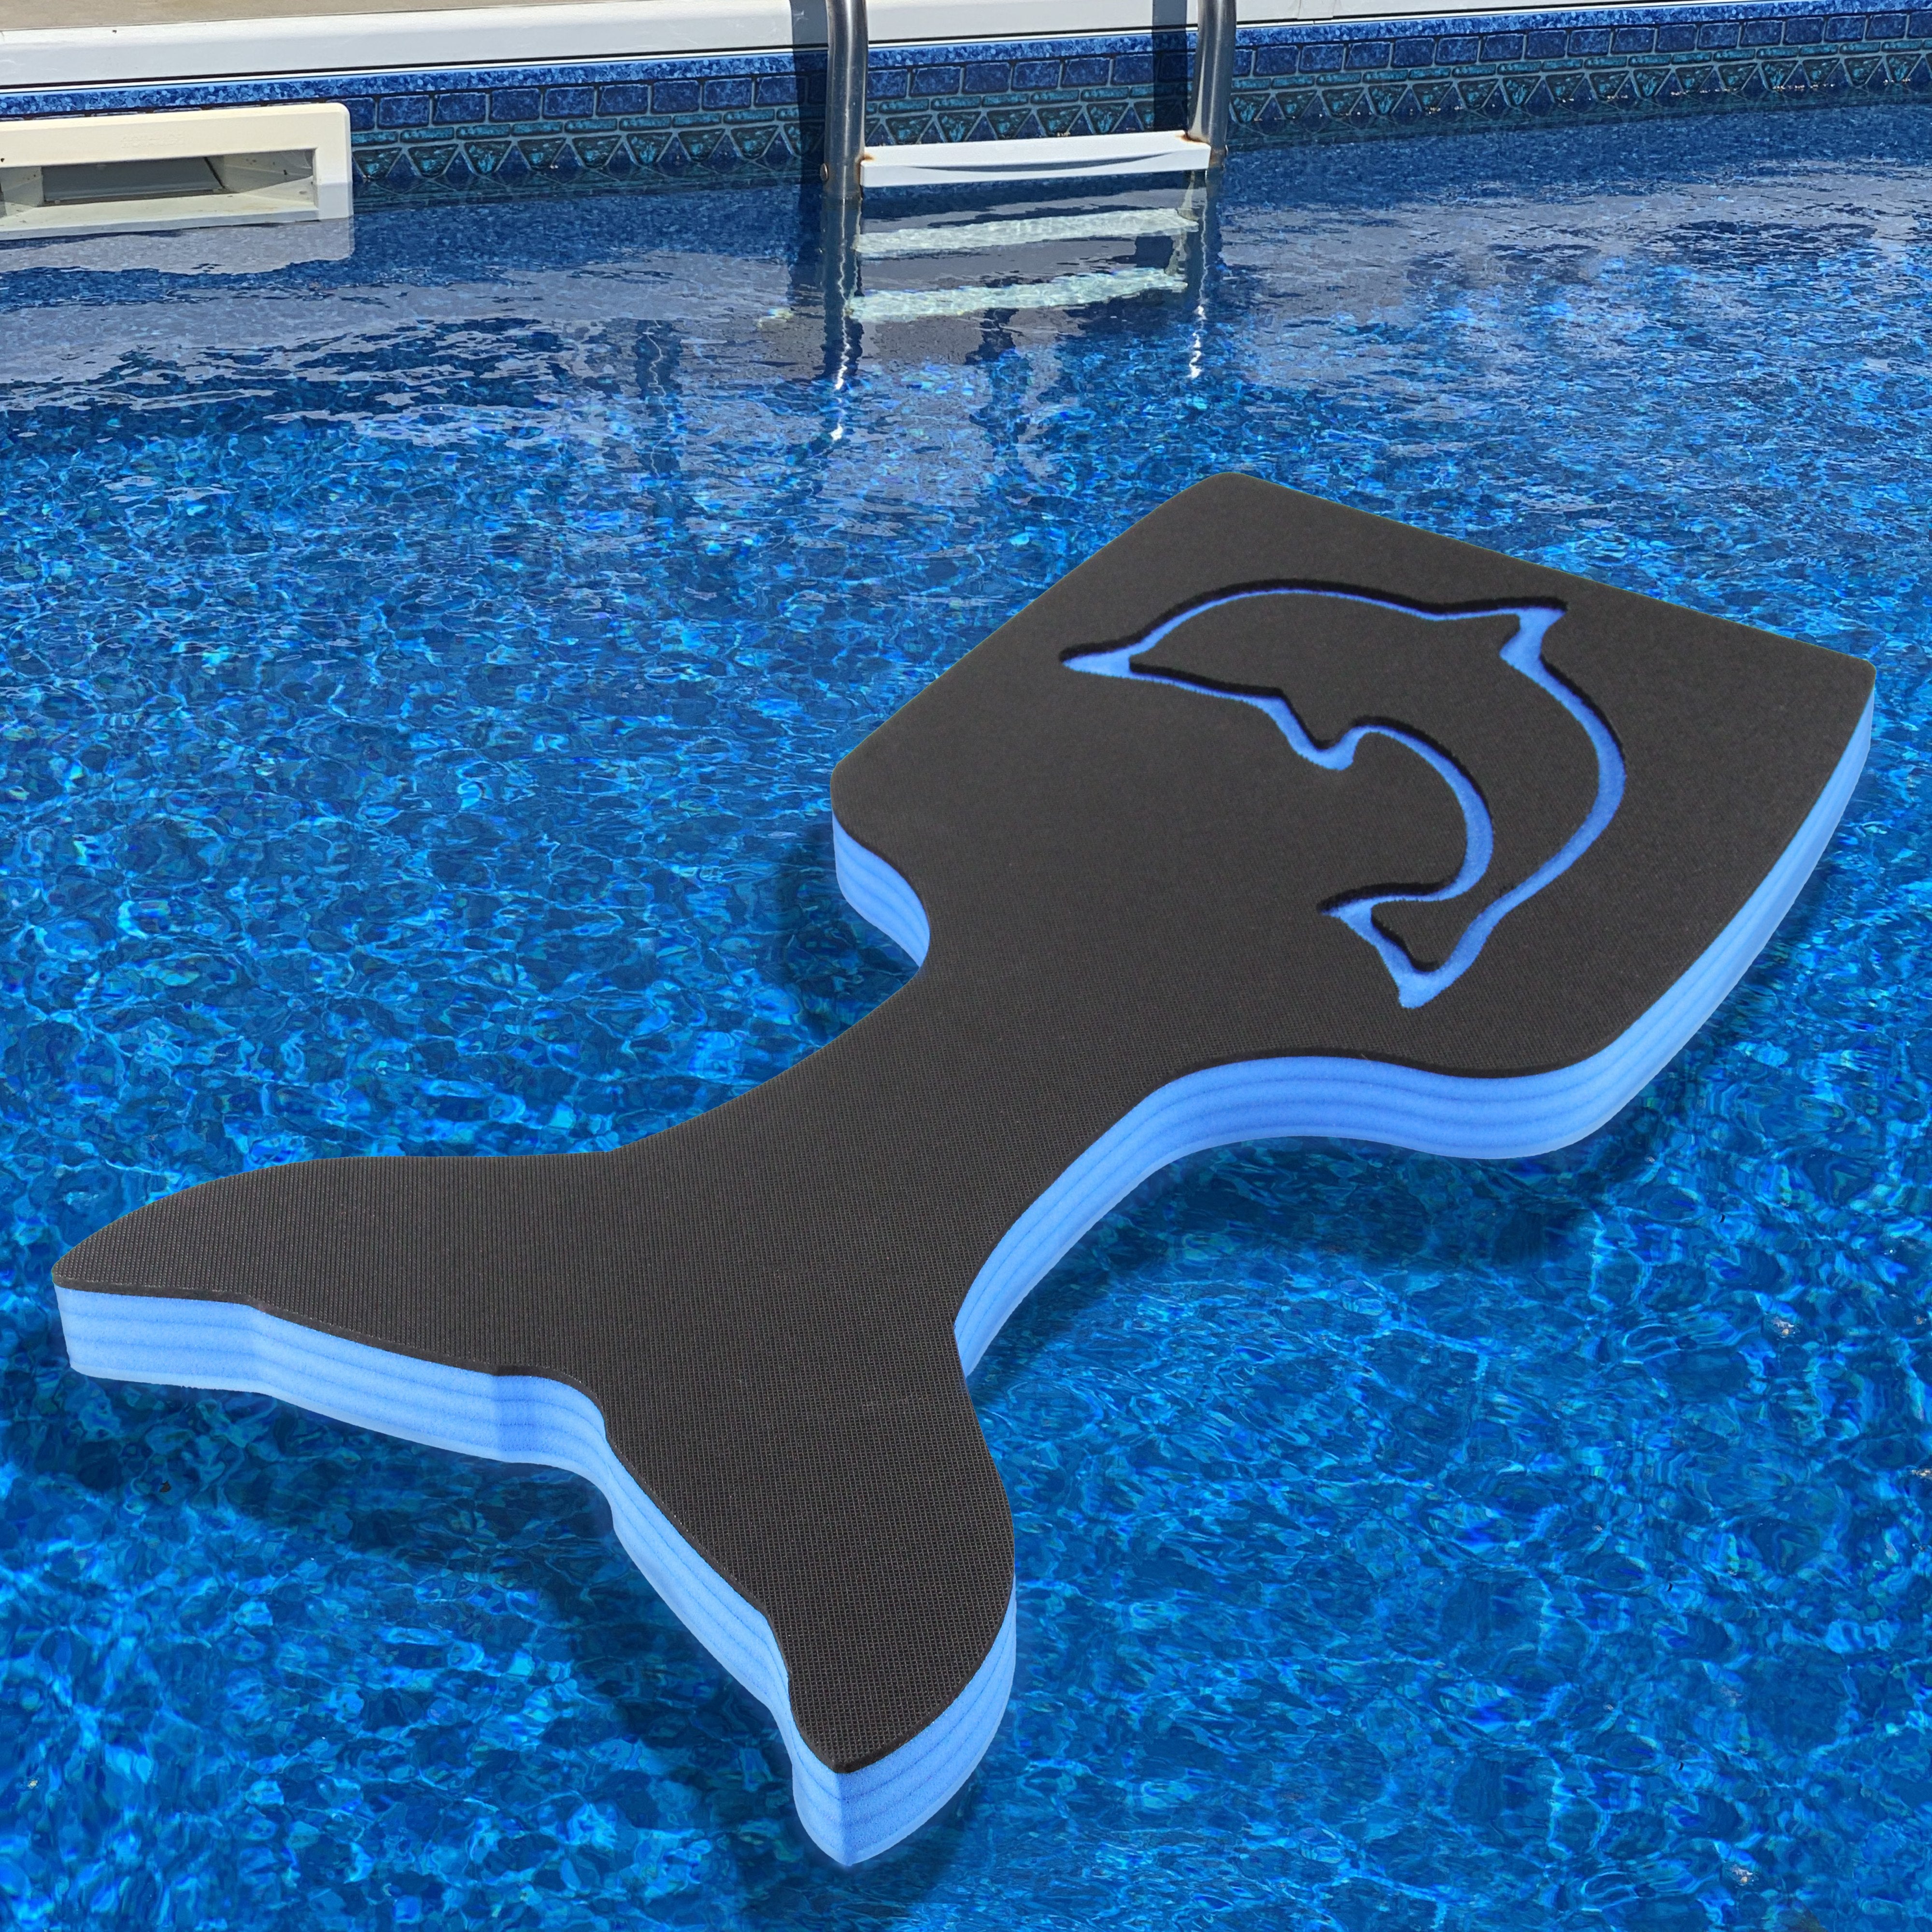 Floating Dolphin Saddle Seat for Pool Lake or Beach Party Comfortable Water Float Lounge Chair Buoyant Durable Heavy Duty Foam 34.5 Inches Long